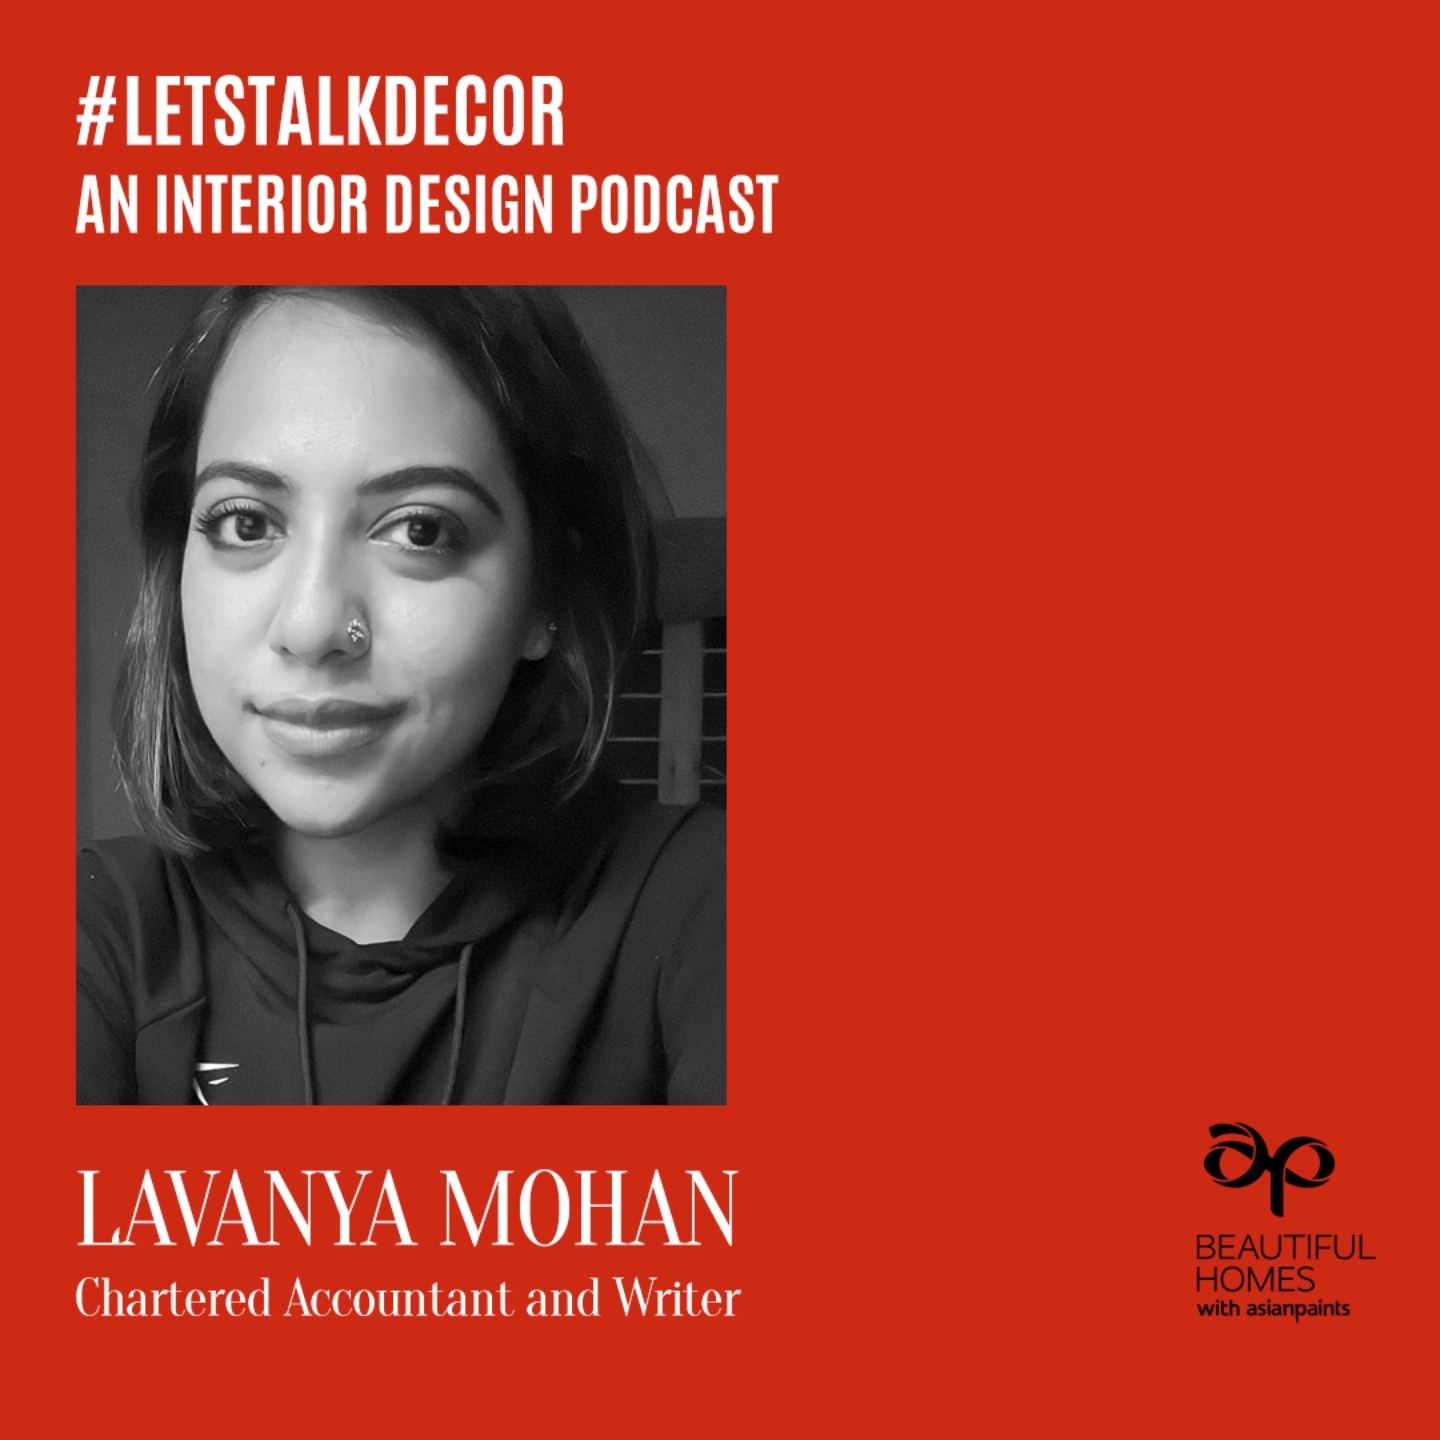 Financial consultant Lavanya Mohan on wise budgeting for the household